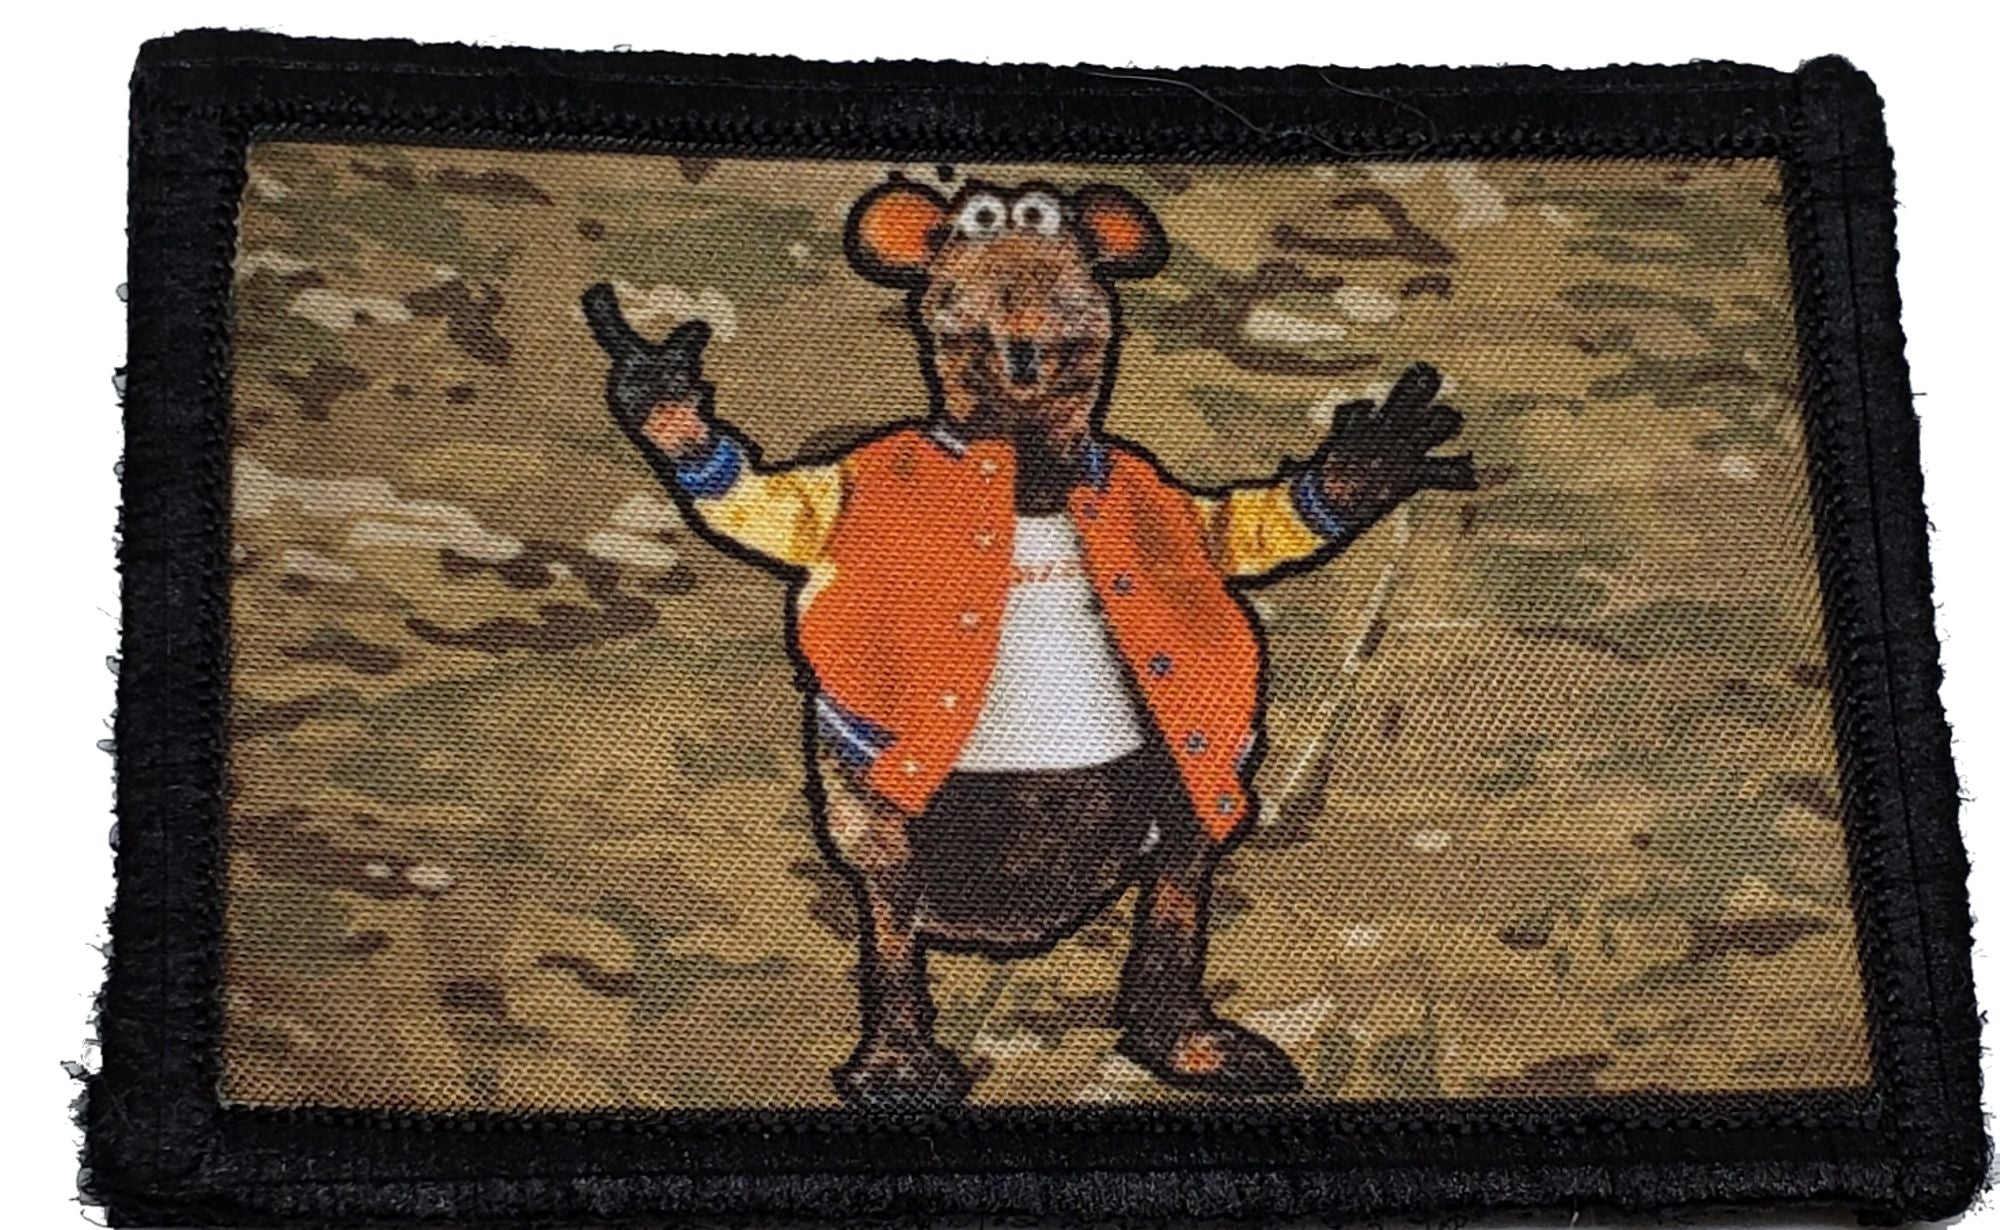 Muppets Rizzo the Rat Multicam Morale Patch